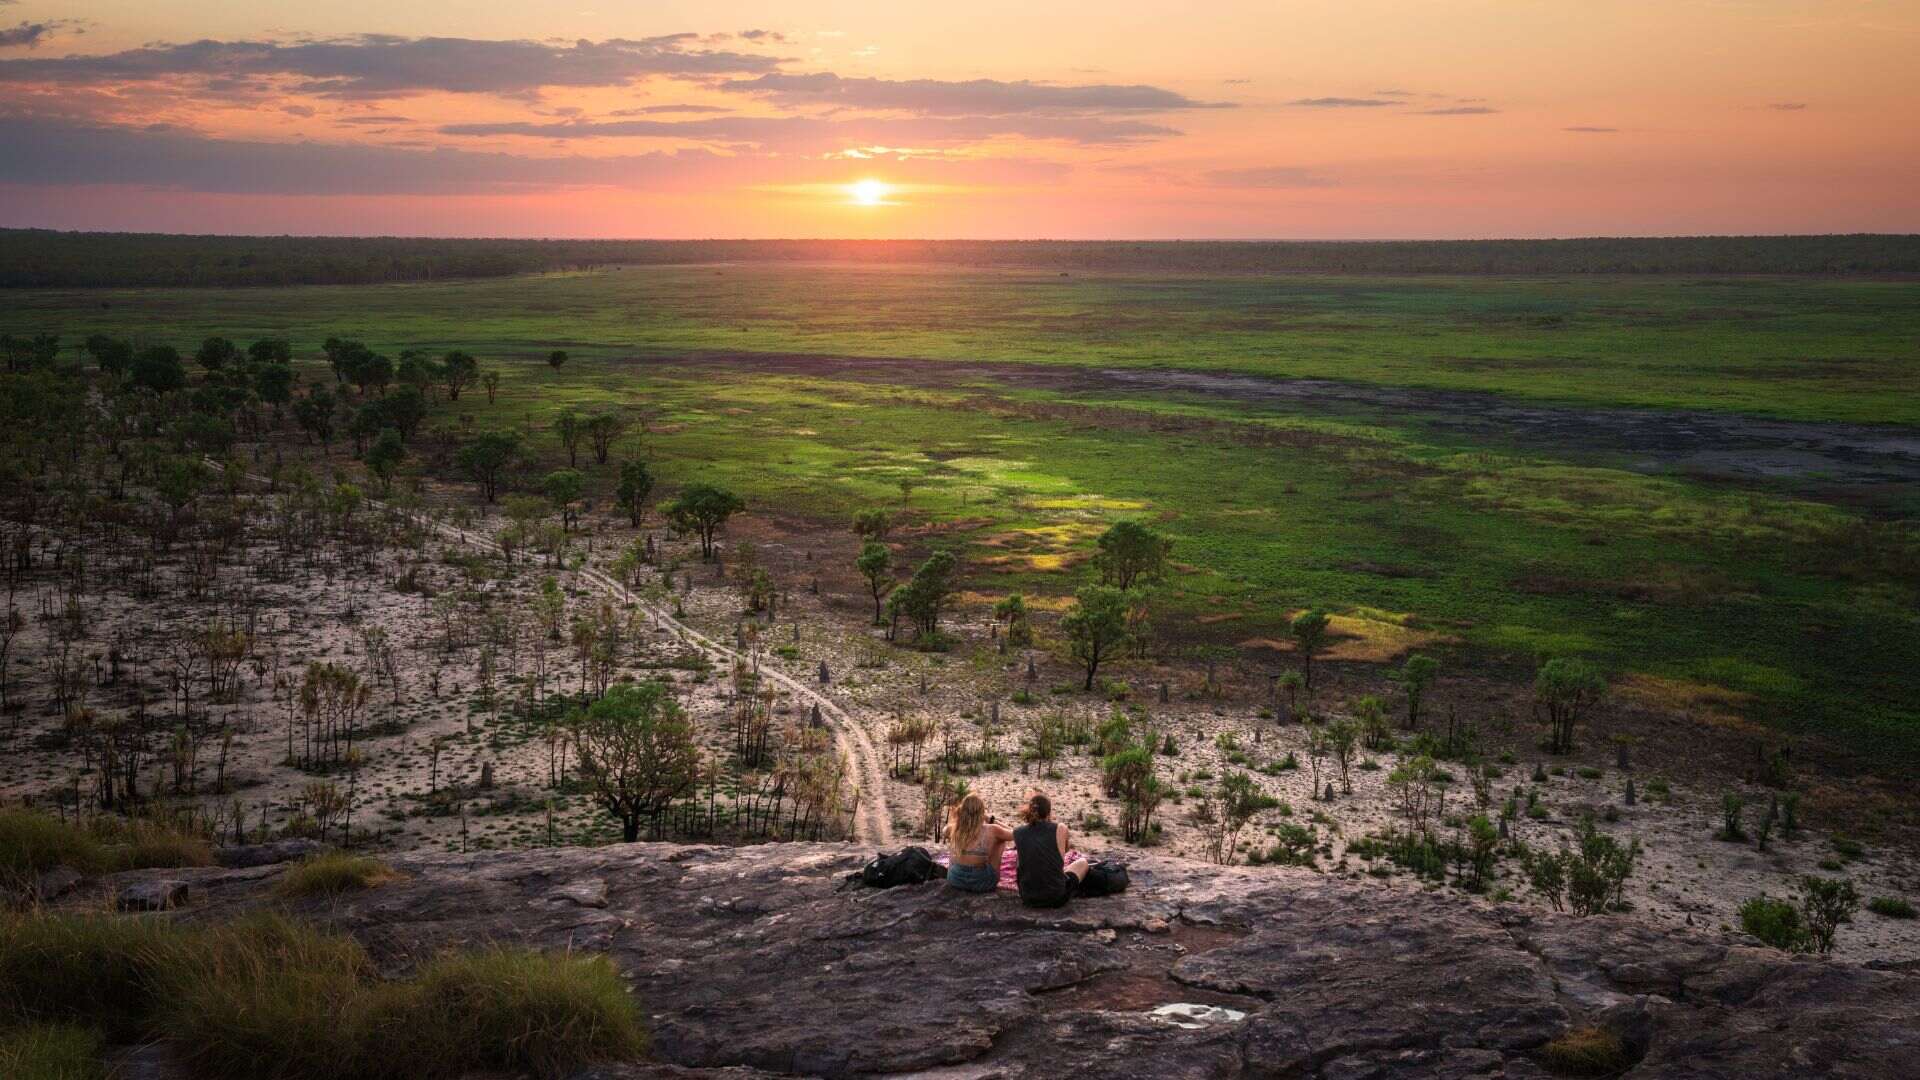 130491-Couple-enjoying-the-sunset-at-Ubirr.-Tourism-NT_Daniel-Tran.-Supplied Experience stunning vistas, epic wonders and the unique flora and fauna in the tropics of the Top End at Kakadu National Park.